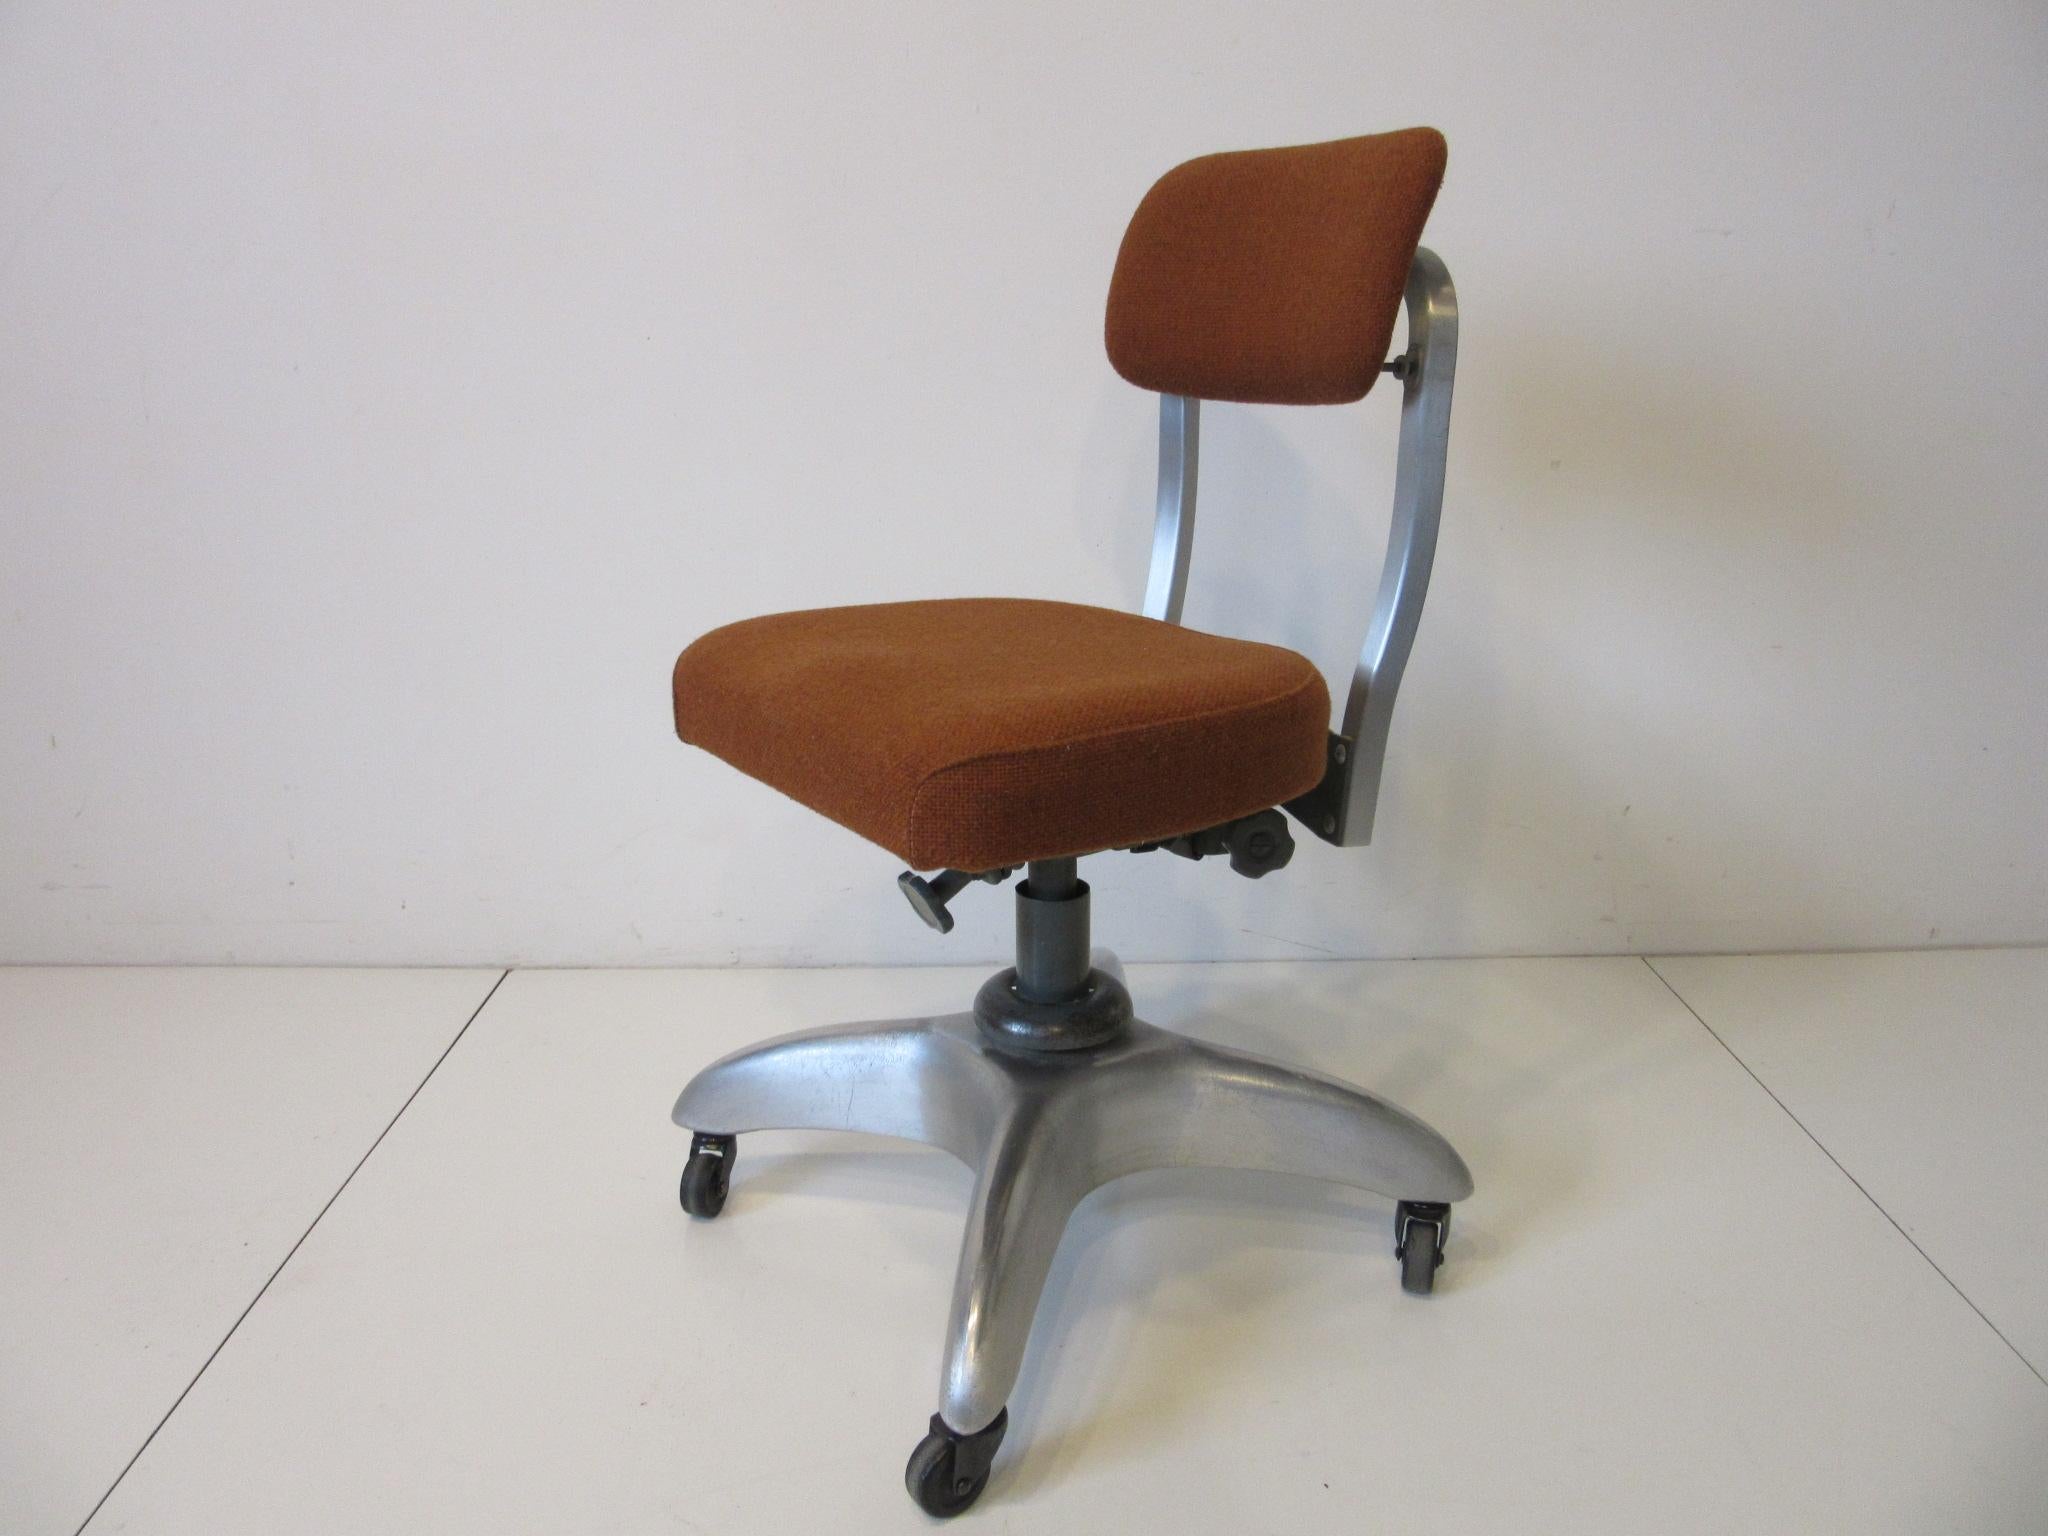 Aluminum Streamline / Industrial Desk Chair by General Fireproofing Co.